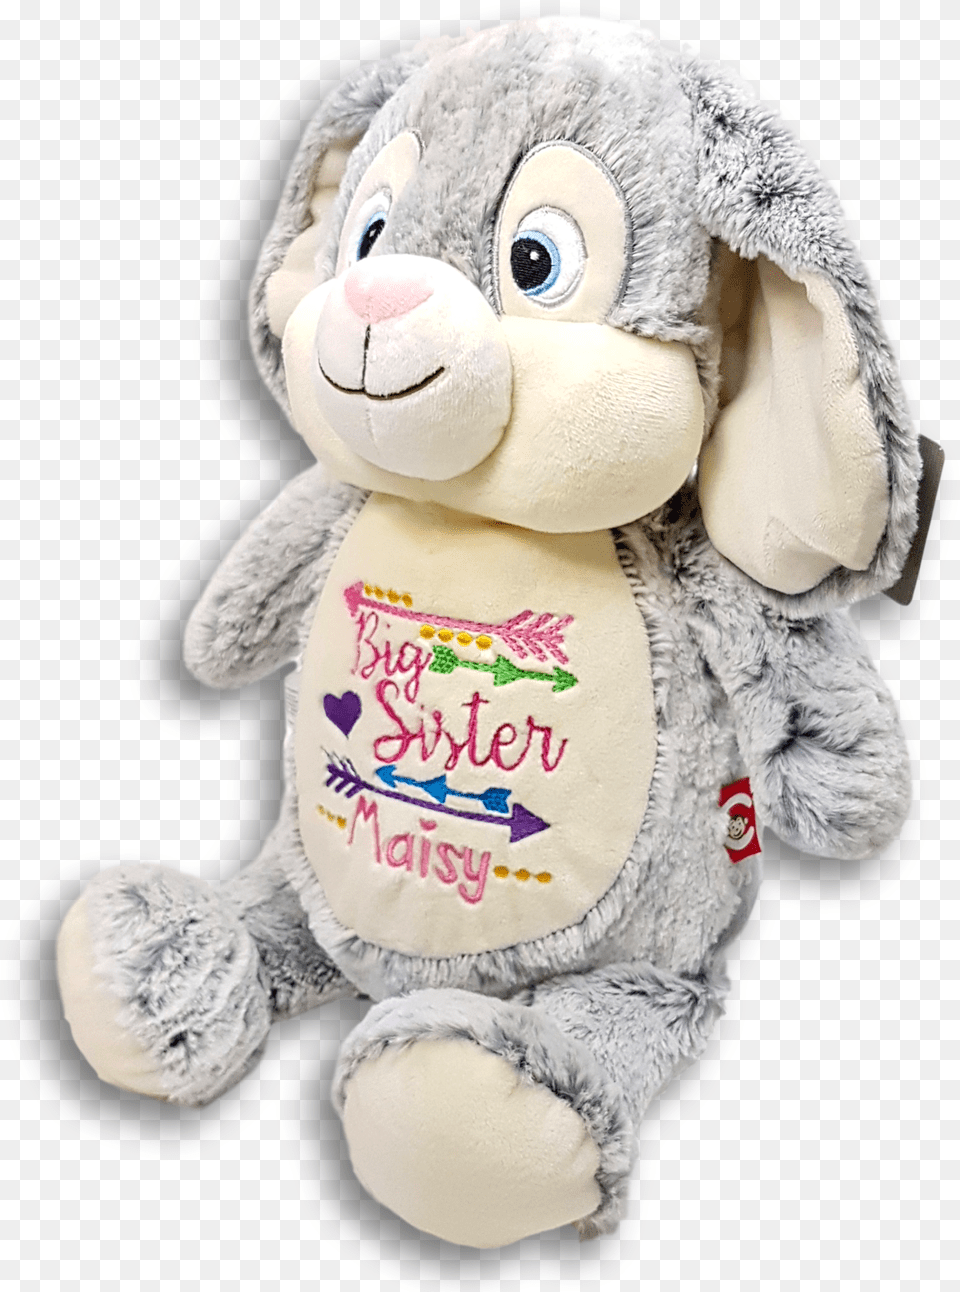 Big Sister Arrow Personalised Baby Embroidered Soft Stuffed Toy, Plush Free Png